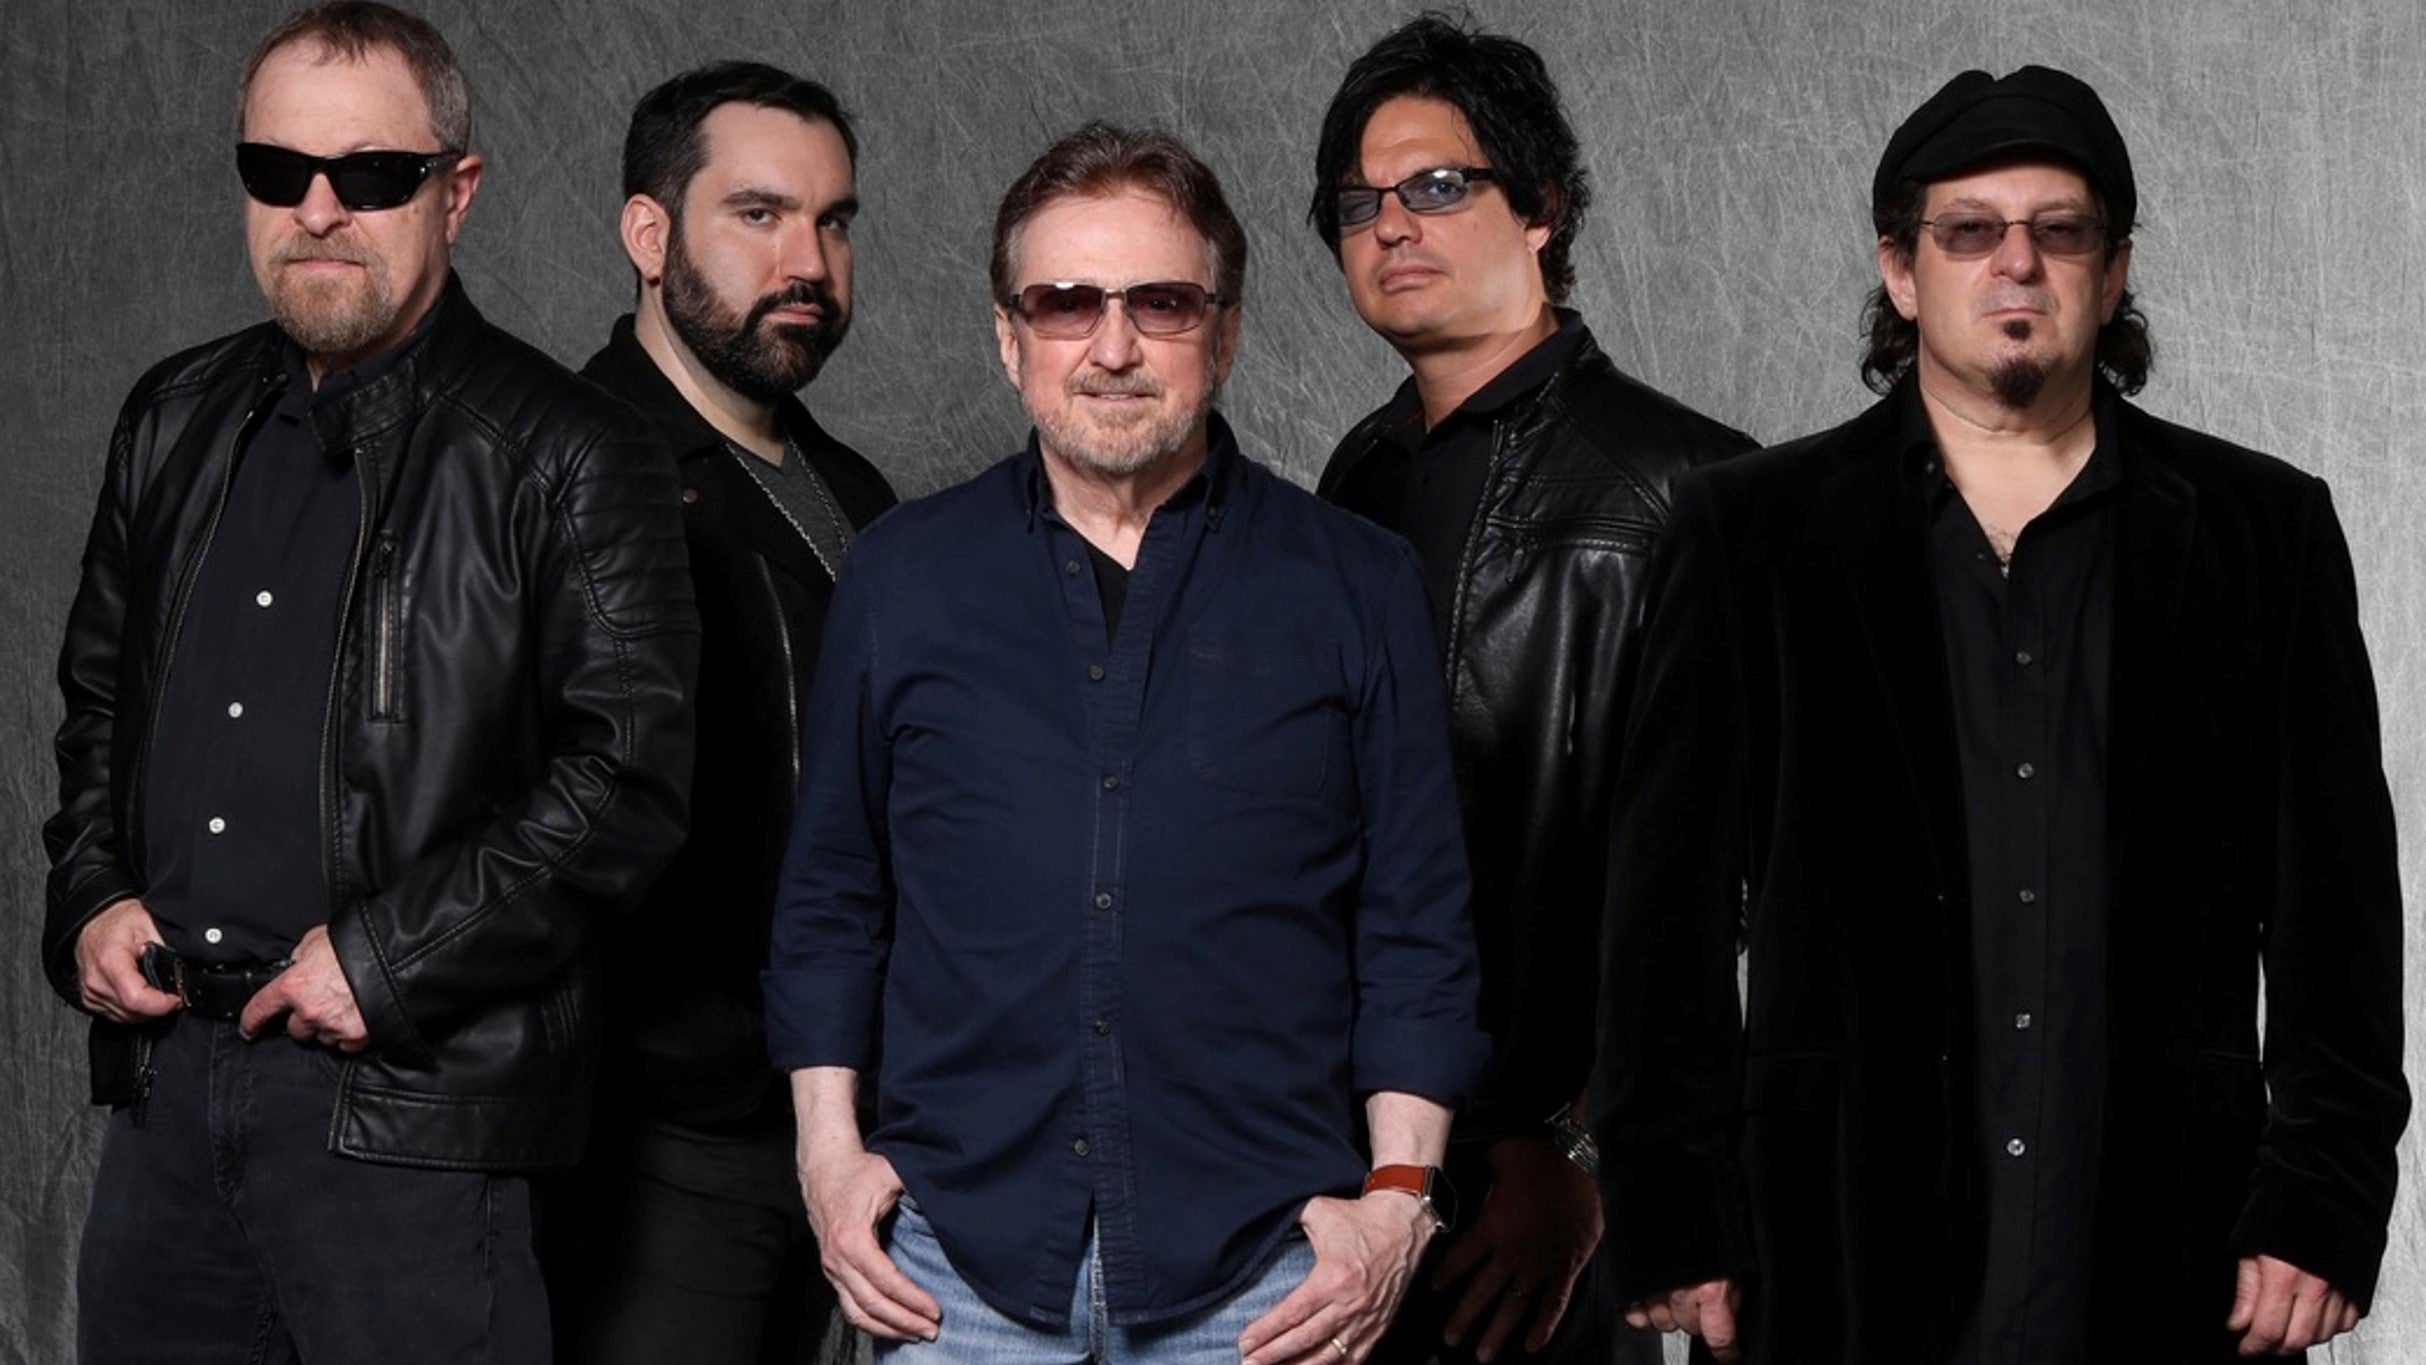 Blue Oyster Cult at Gold Country Casino & Hotel